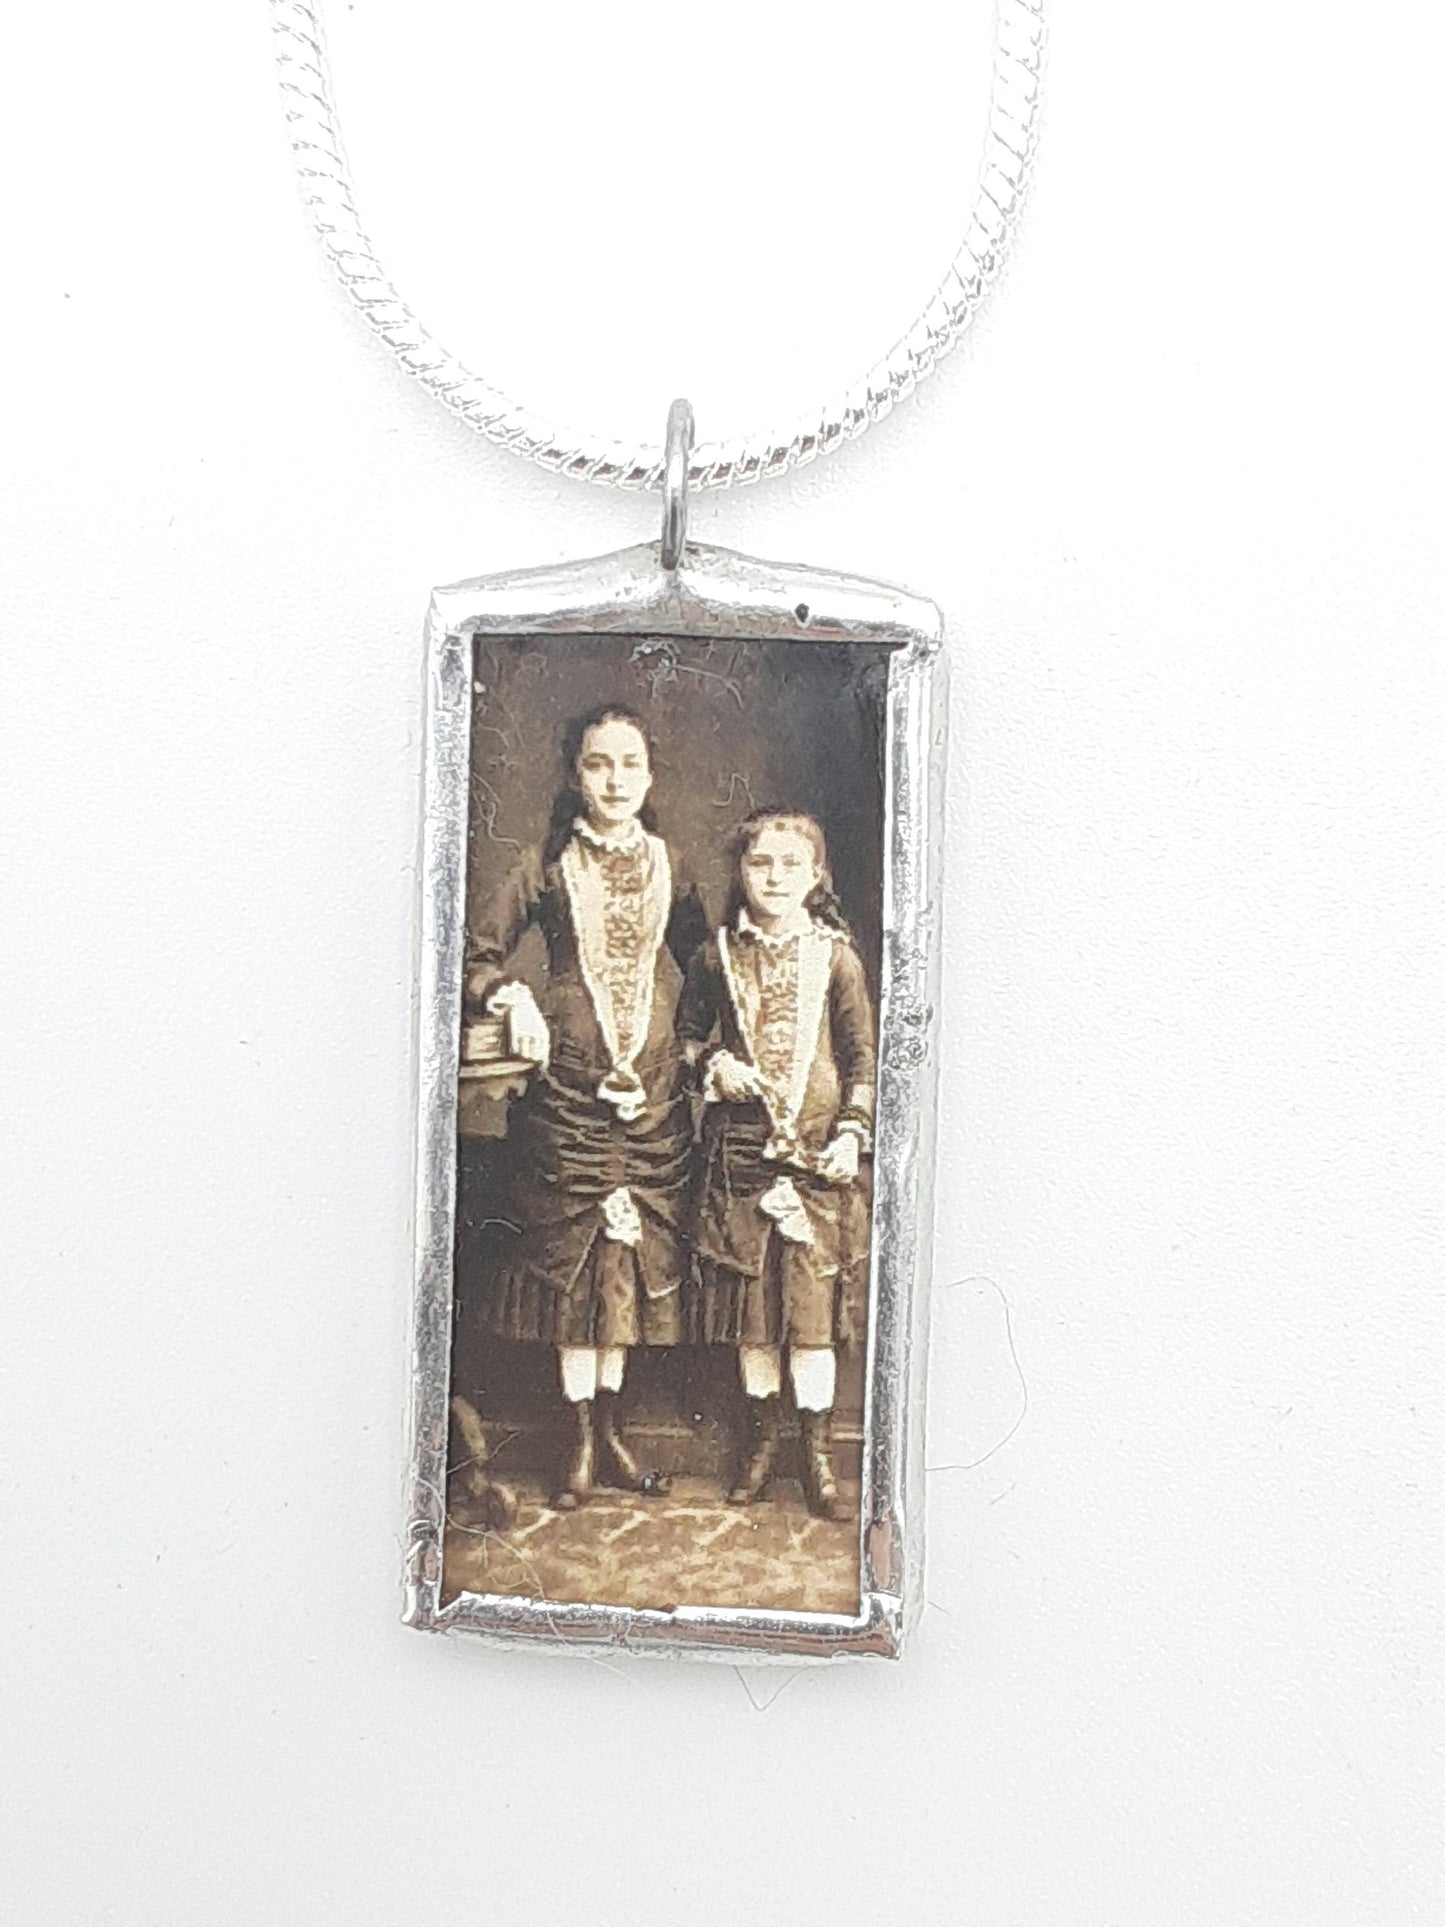 Saint Therese and Celine Medal - Hand Soldered Charm Pendant - Catholic Jewelry